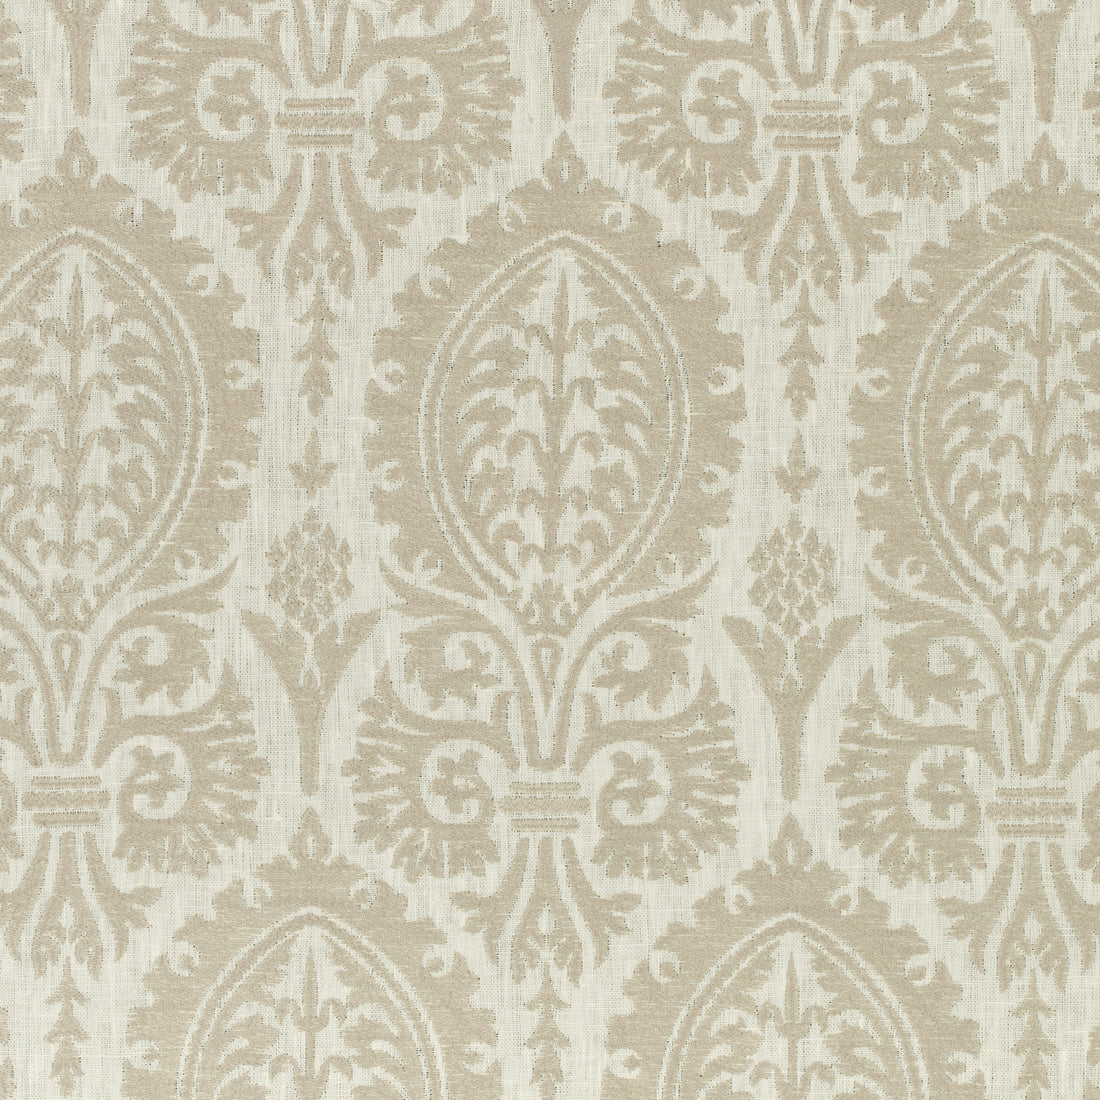 Sir Thomas Embroidery fabric in grey color - pattern number W772570 - by Thibaut in the Chestnut Hill collection